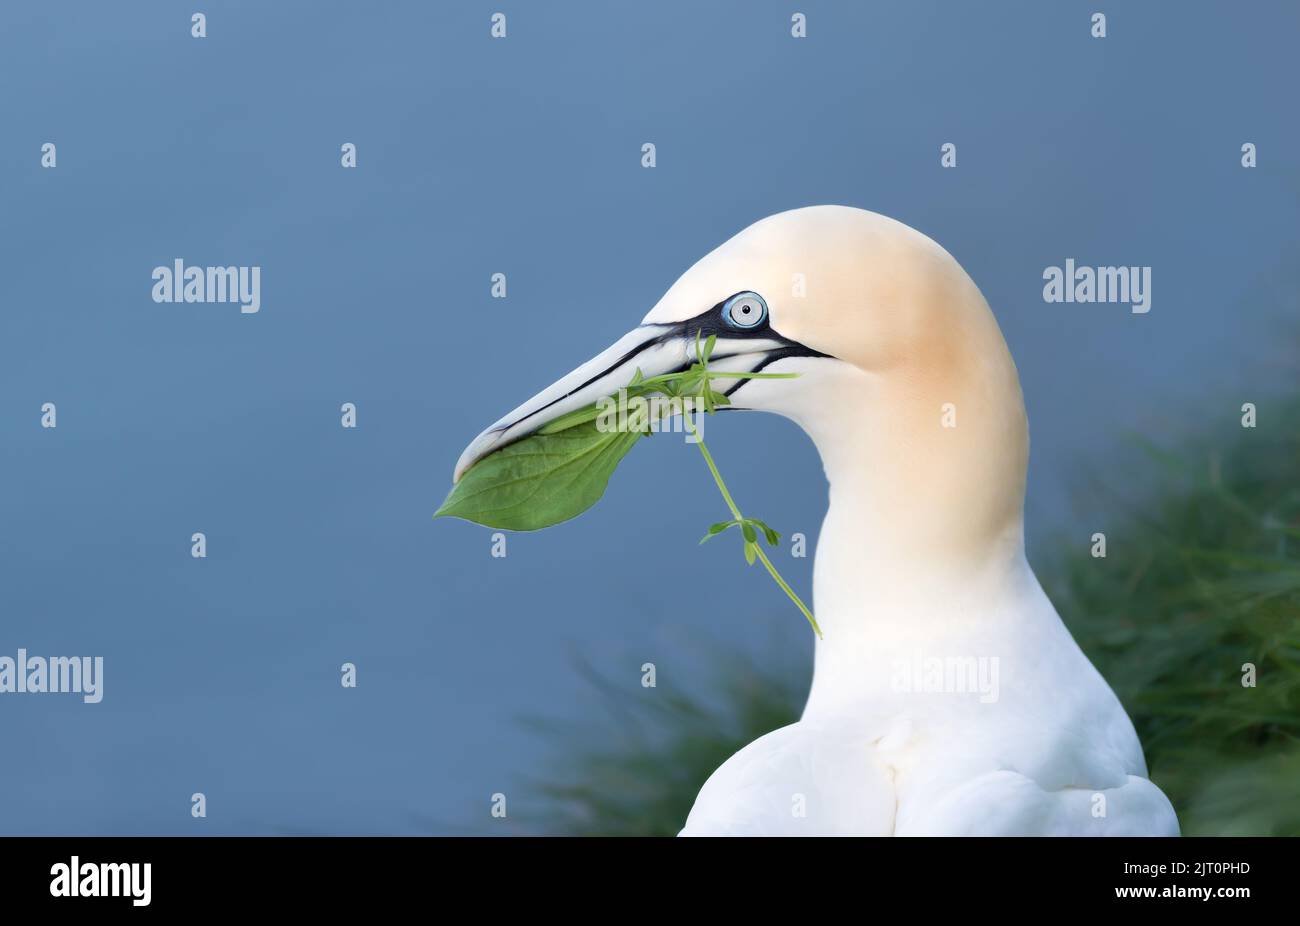 Close up of a Northern gannet (Morus bassana) with nesting material in the beak, Bempton cliffs, UK Stock Photo